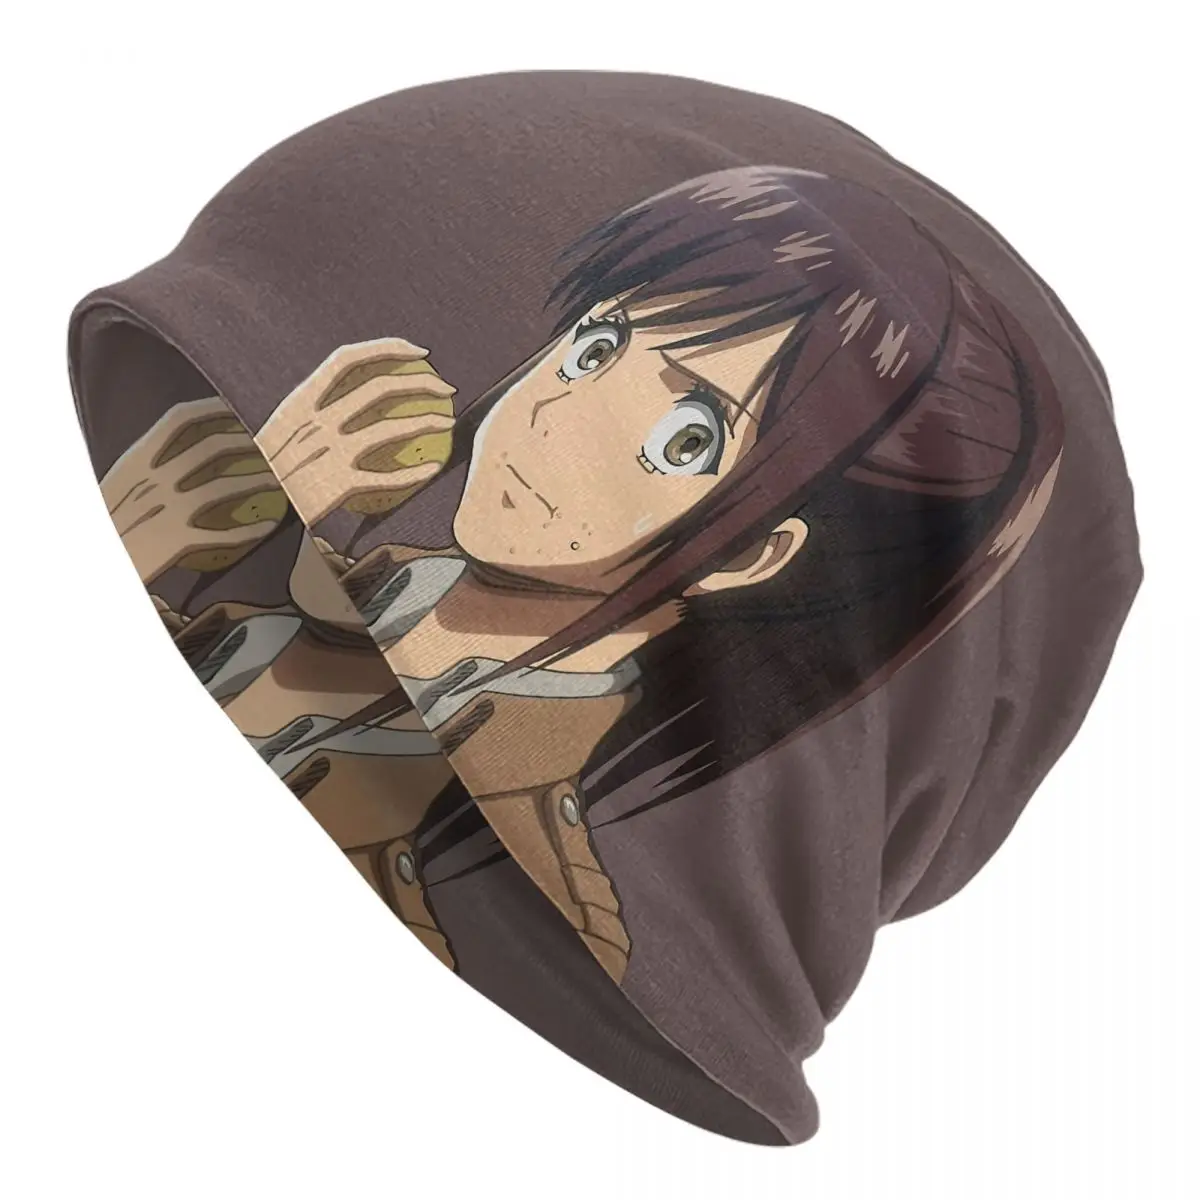 Sasha (Attack On Titan) Adult Men's Women's Knit Hat Keep warm winter Funny knitted hat